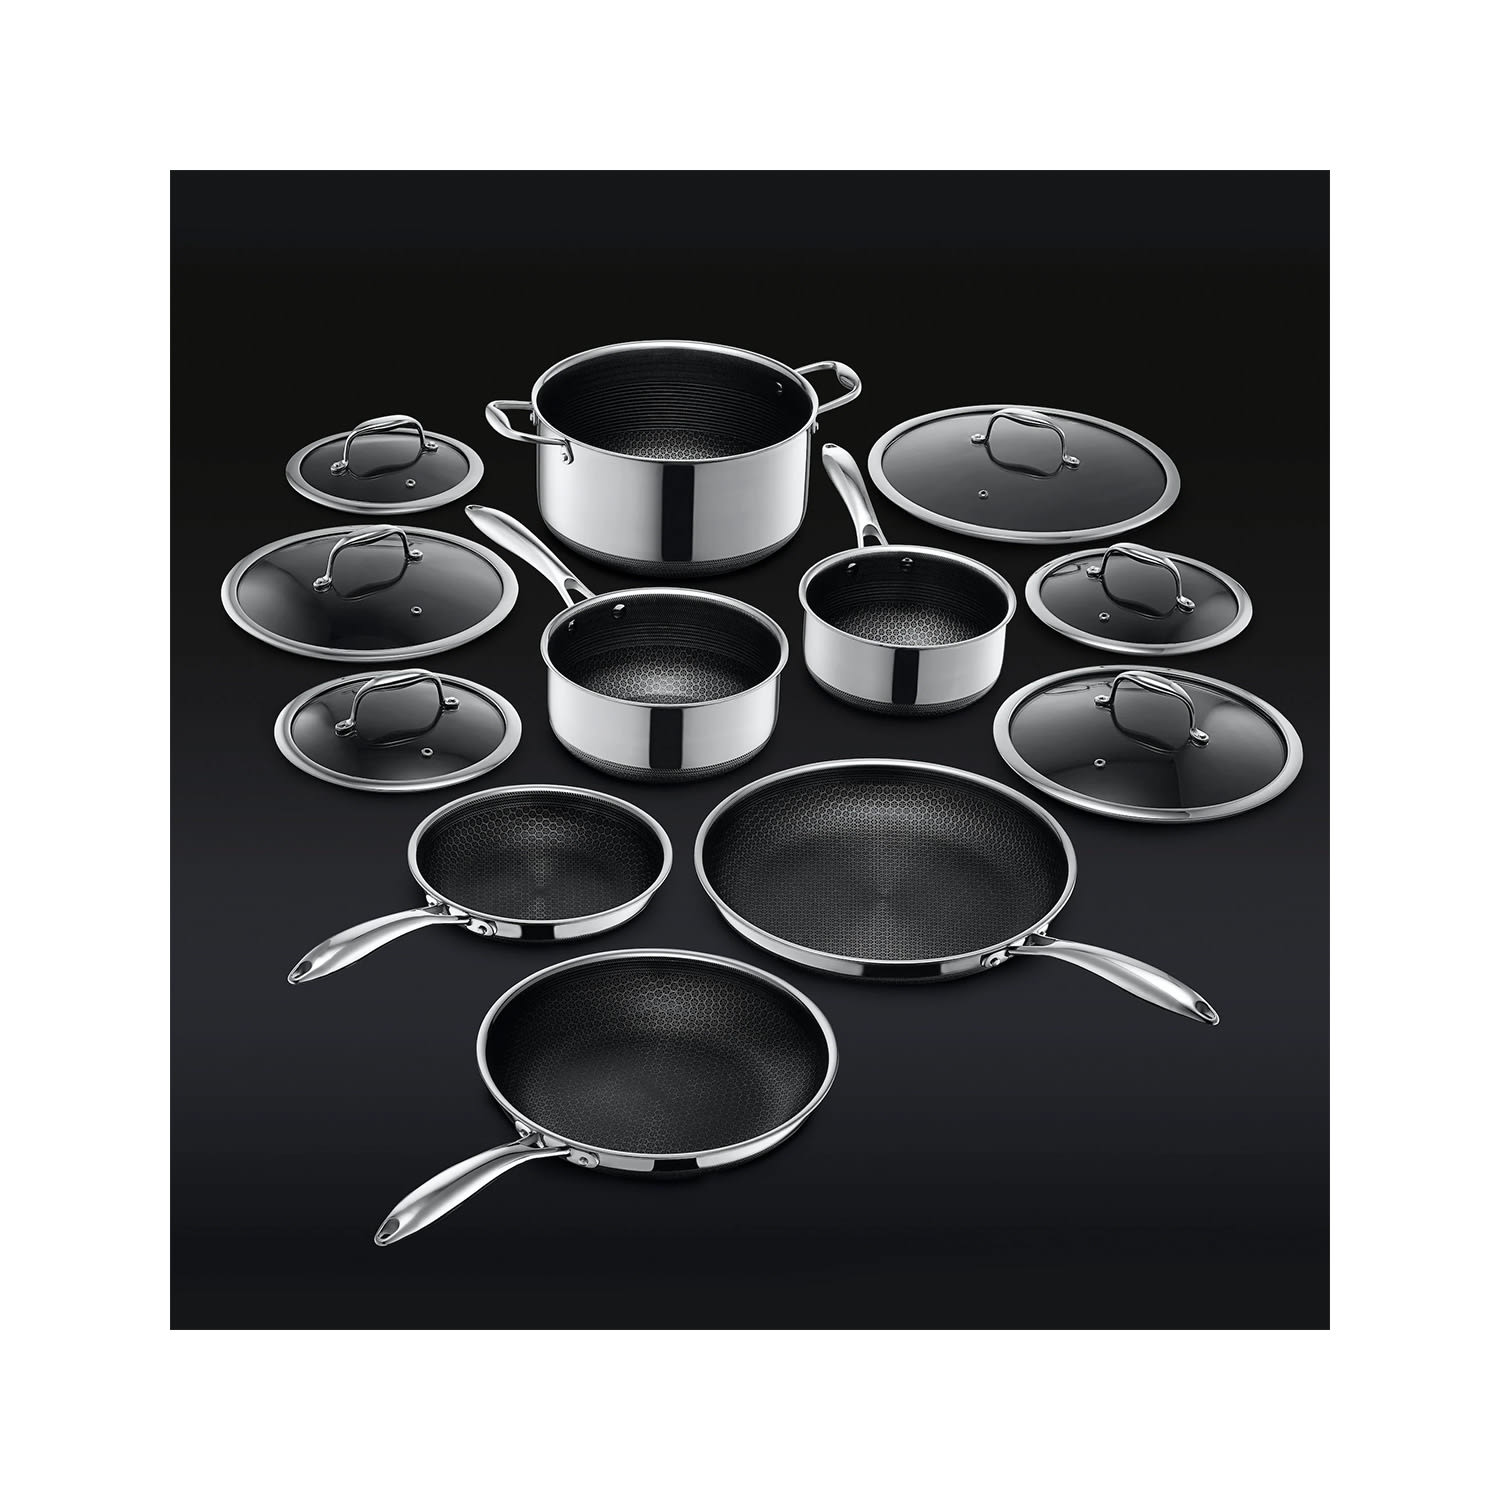 HexClad Review: Is this popular hybrid cookware worth the